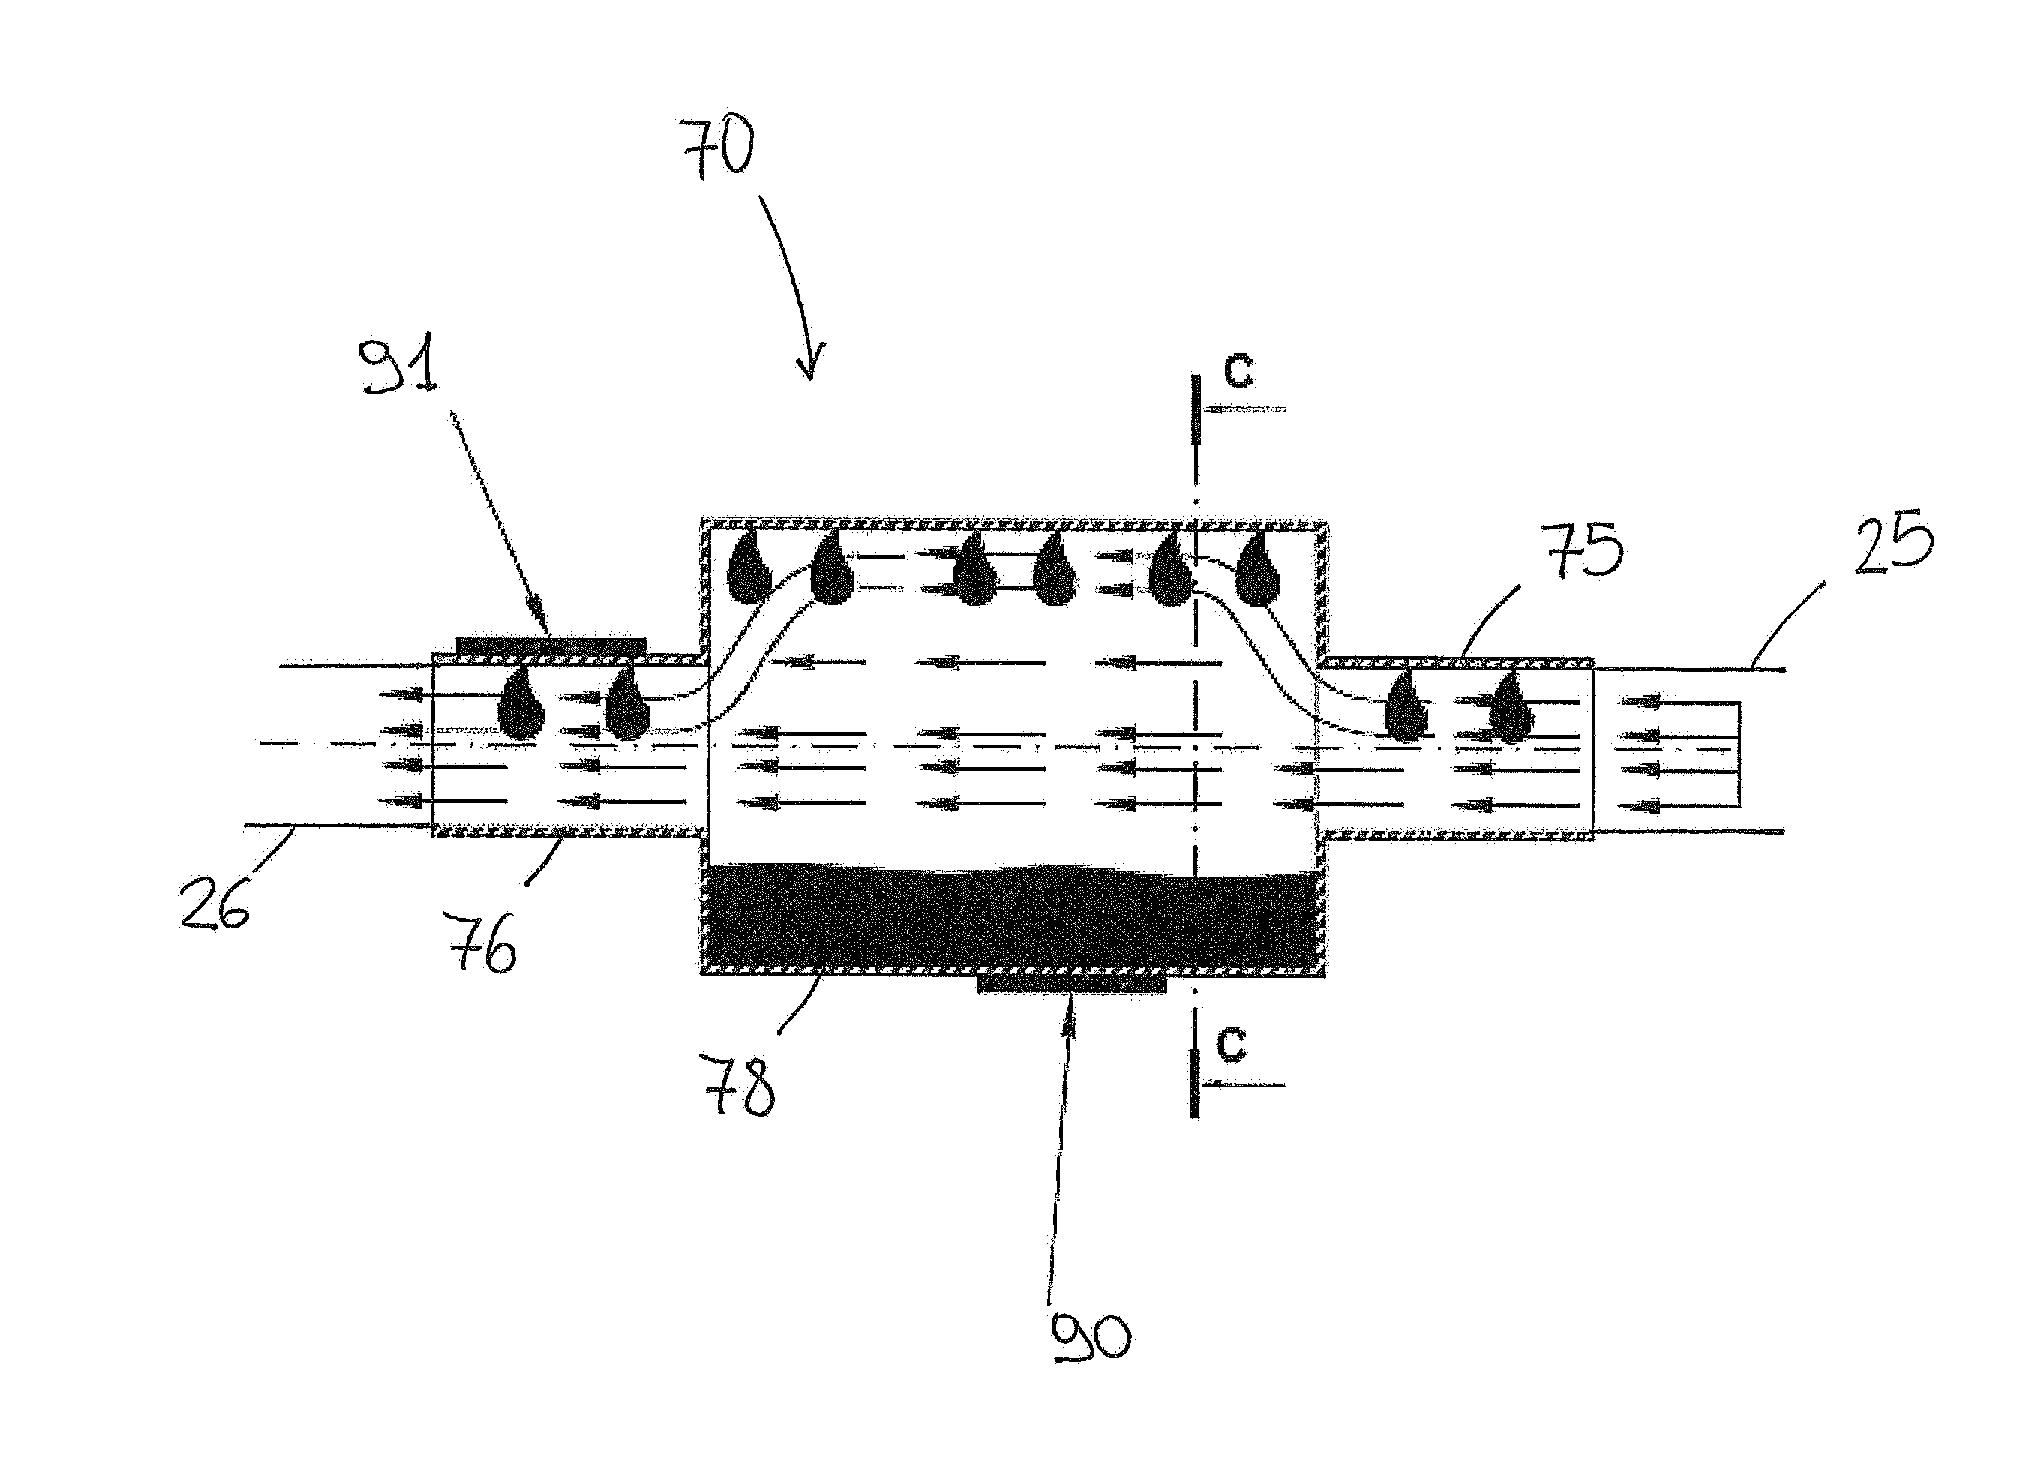 Convection and steam oven comprising a humidity detection and regulation system